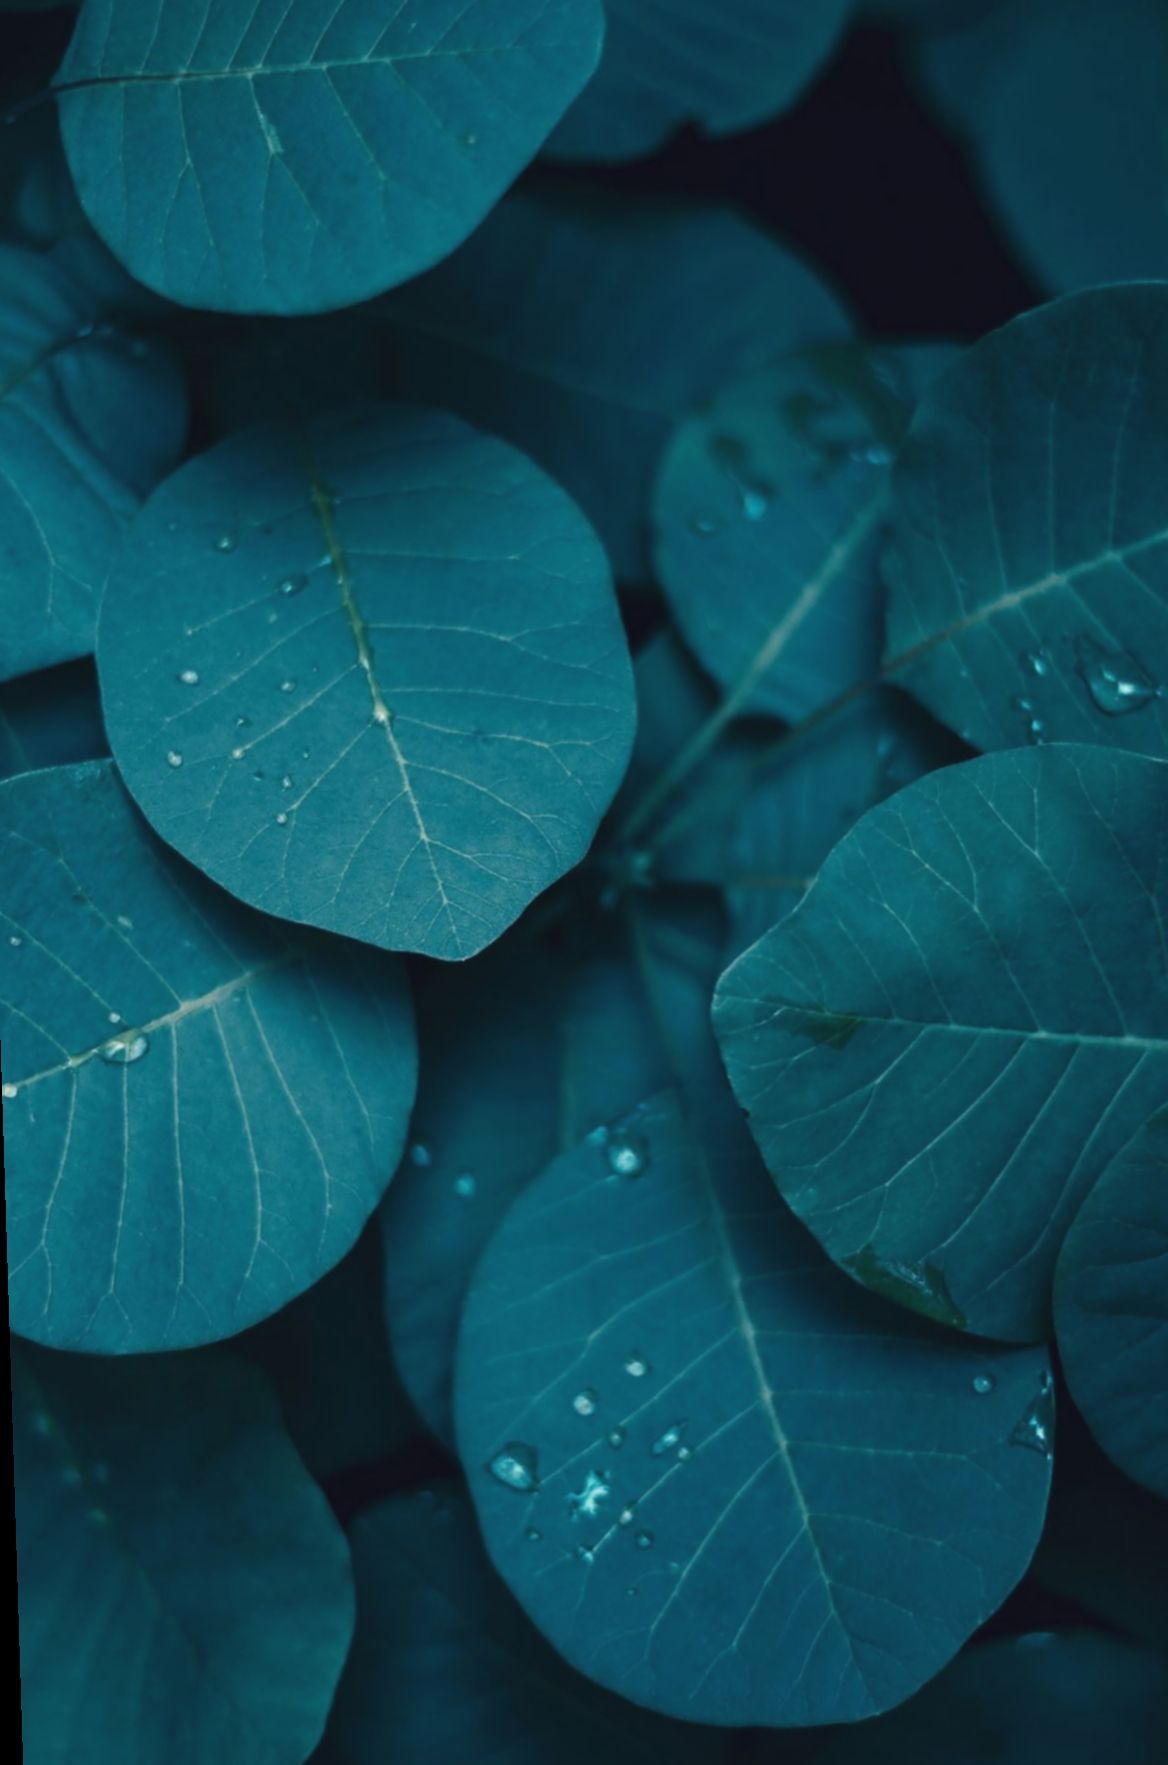 A close up of some green leaves - Turquoise